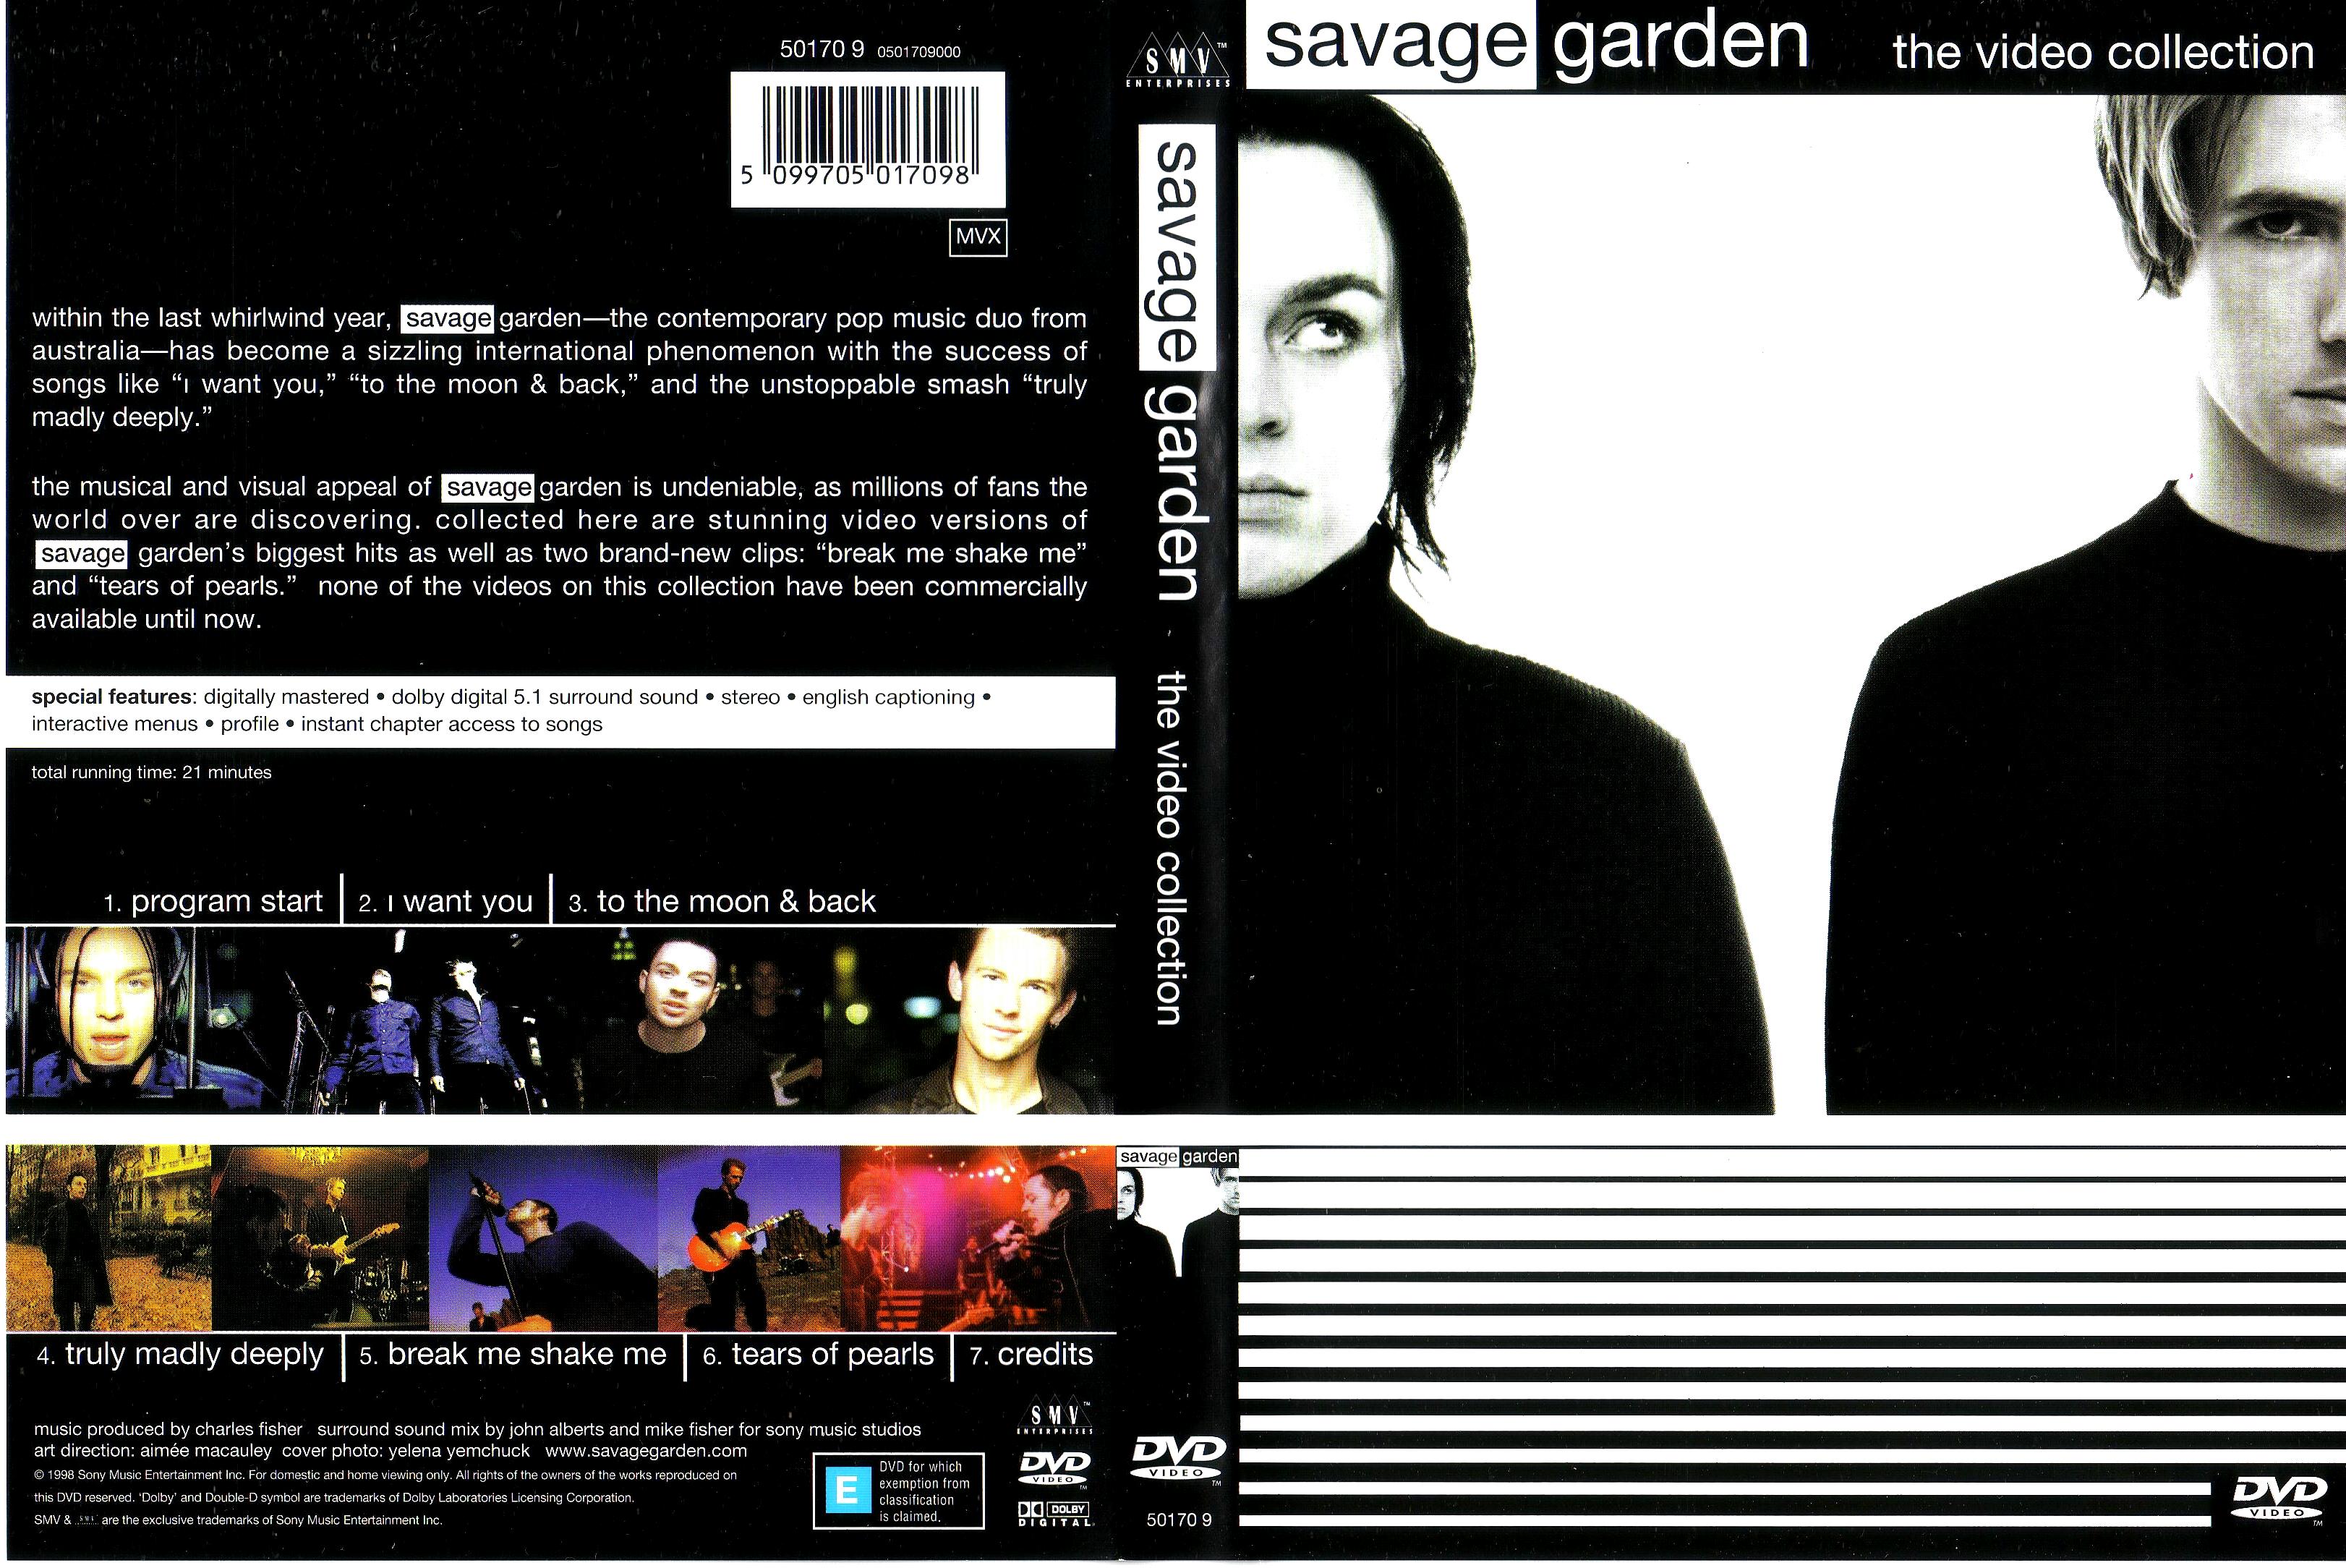 Jaquette DVD Savage Garden Video Collection